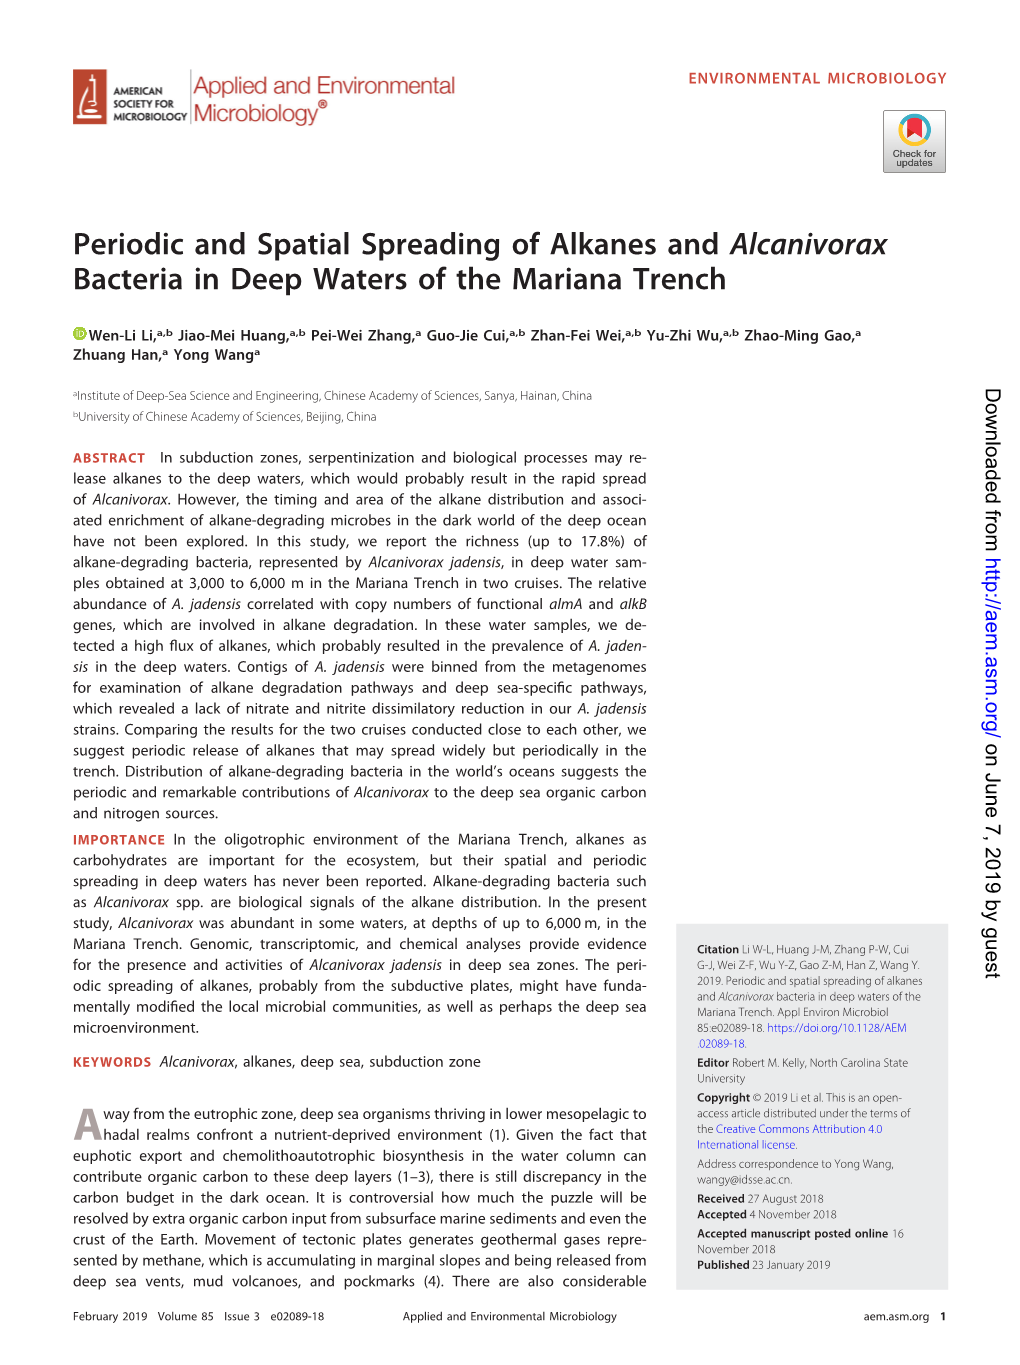 Periodic and Spatial Spreading of Alkanes and Alcanivorax Bacteria in Deep Waters of the Mariana Trench